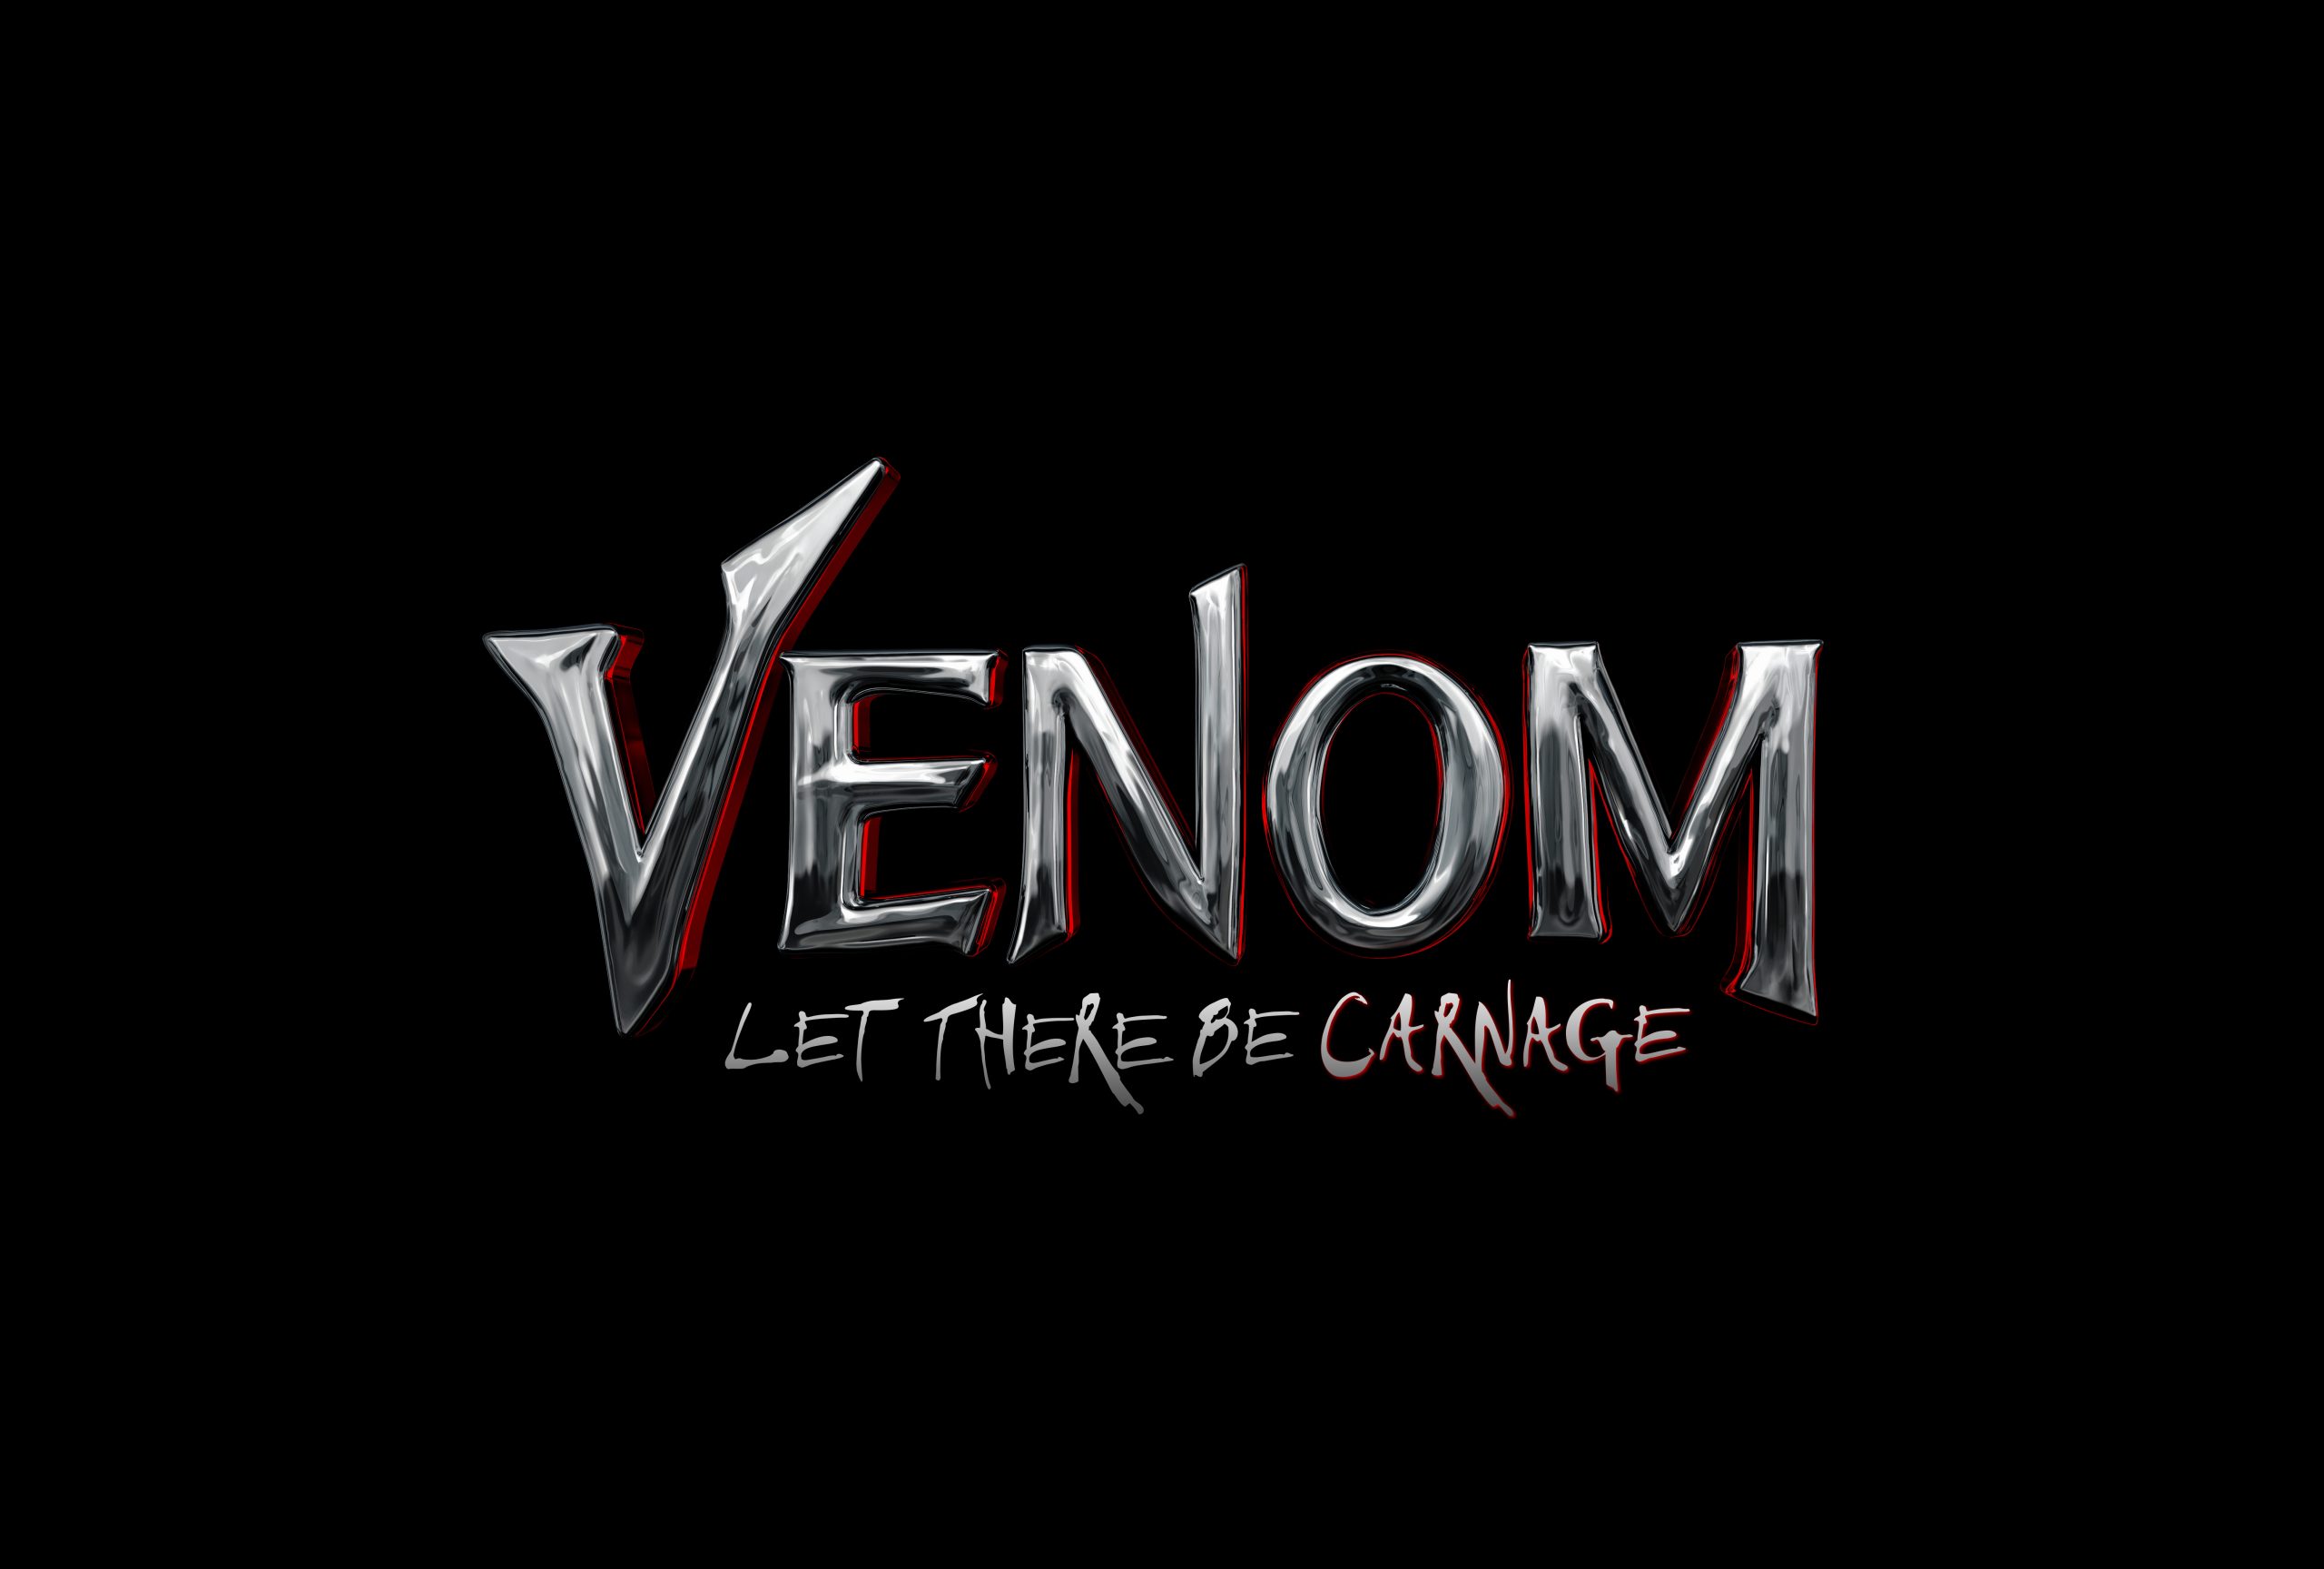 venom: let there be carnage, movie